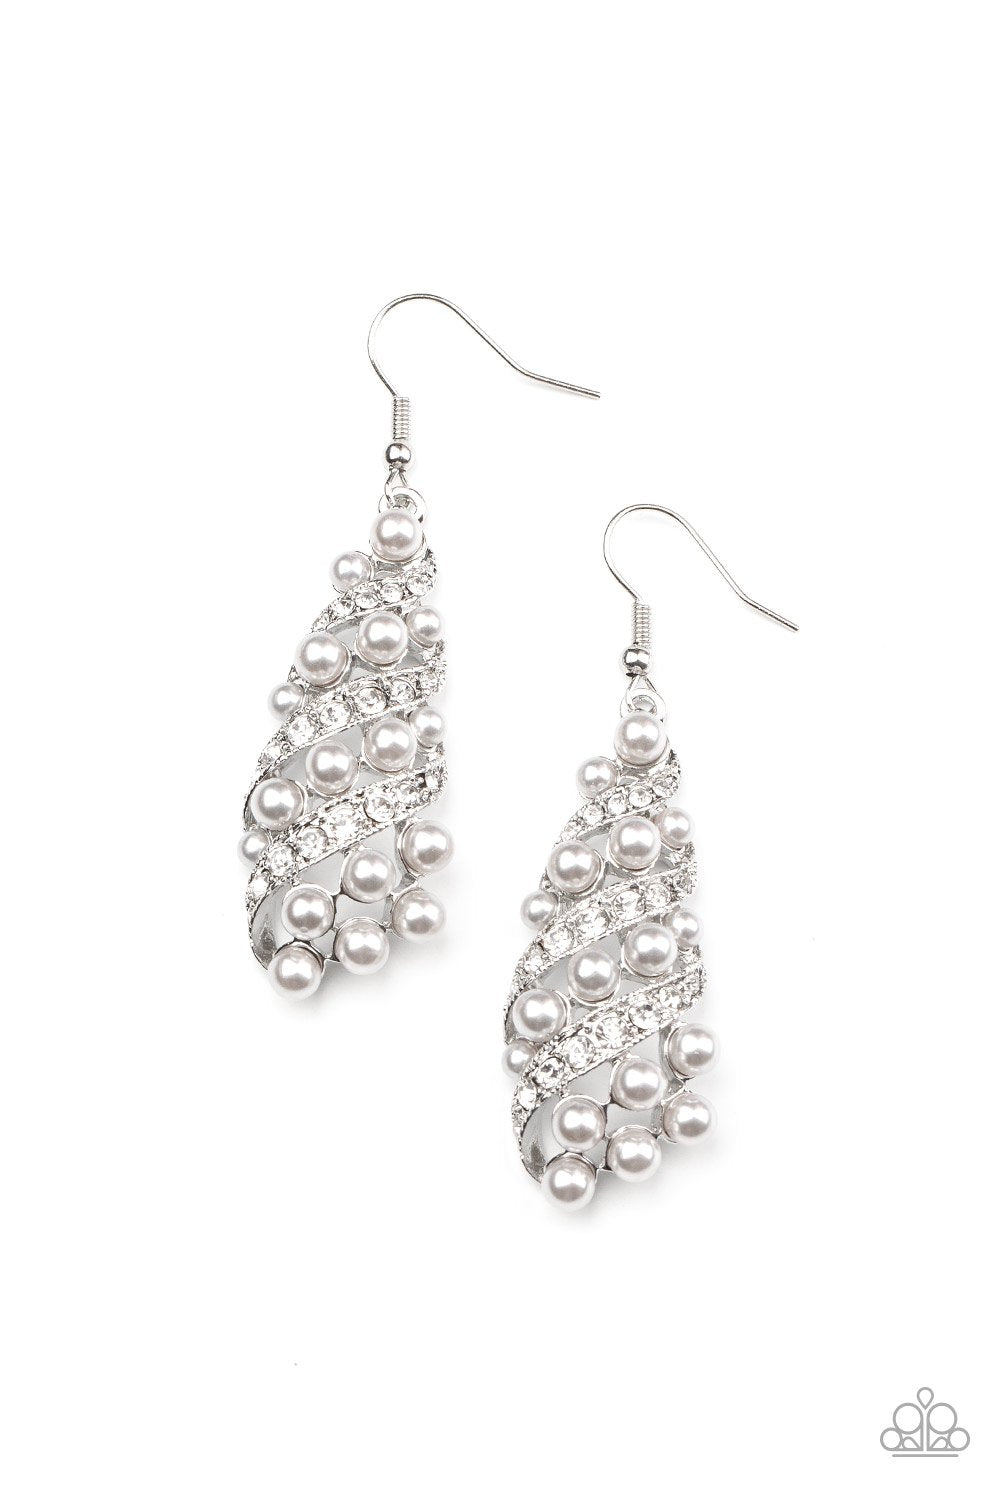 Ballroom Waltz Silver Pearl and White Rhinestone Earrings - Paparazzi Accessories-CarasShop.com - $5 Jewelry by Cara Jewels